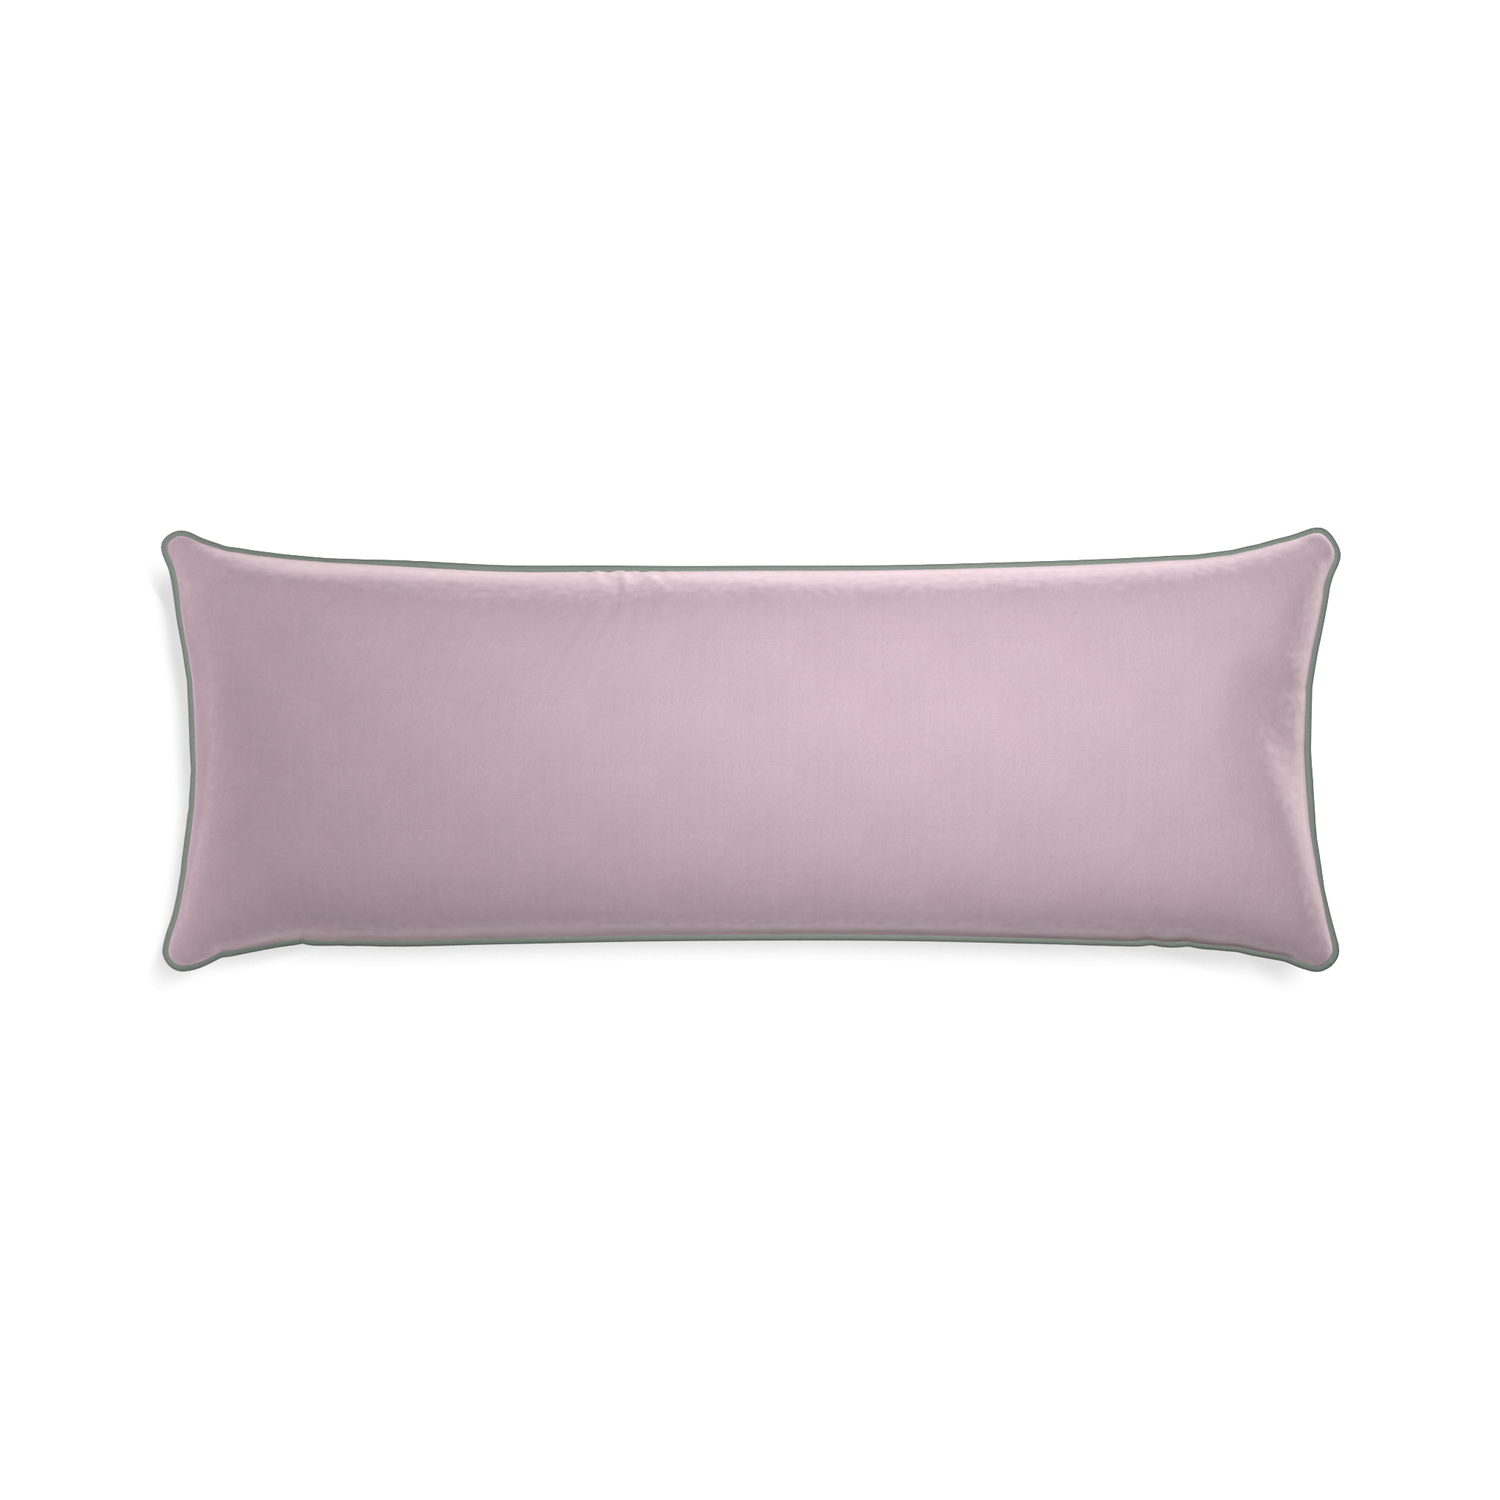 Xl-lumbar lilac velvet custom lilacpillow with sage piping on white background